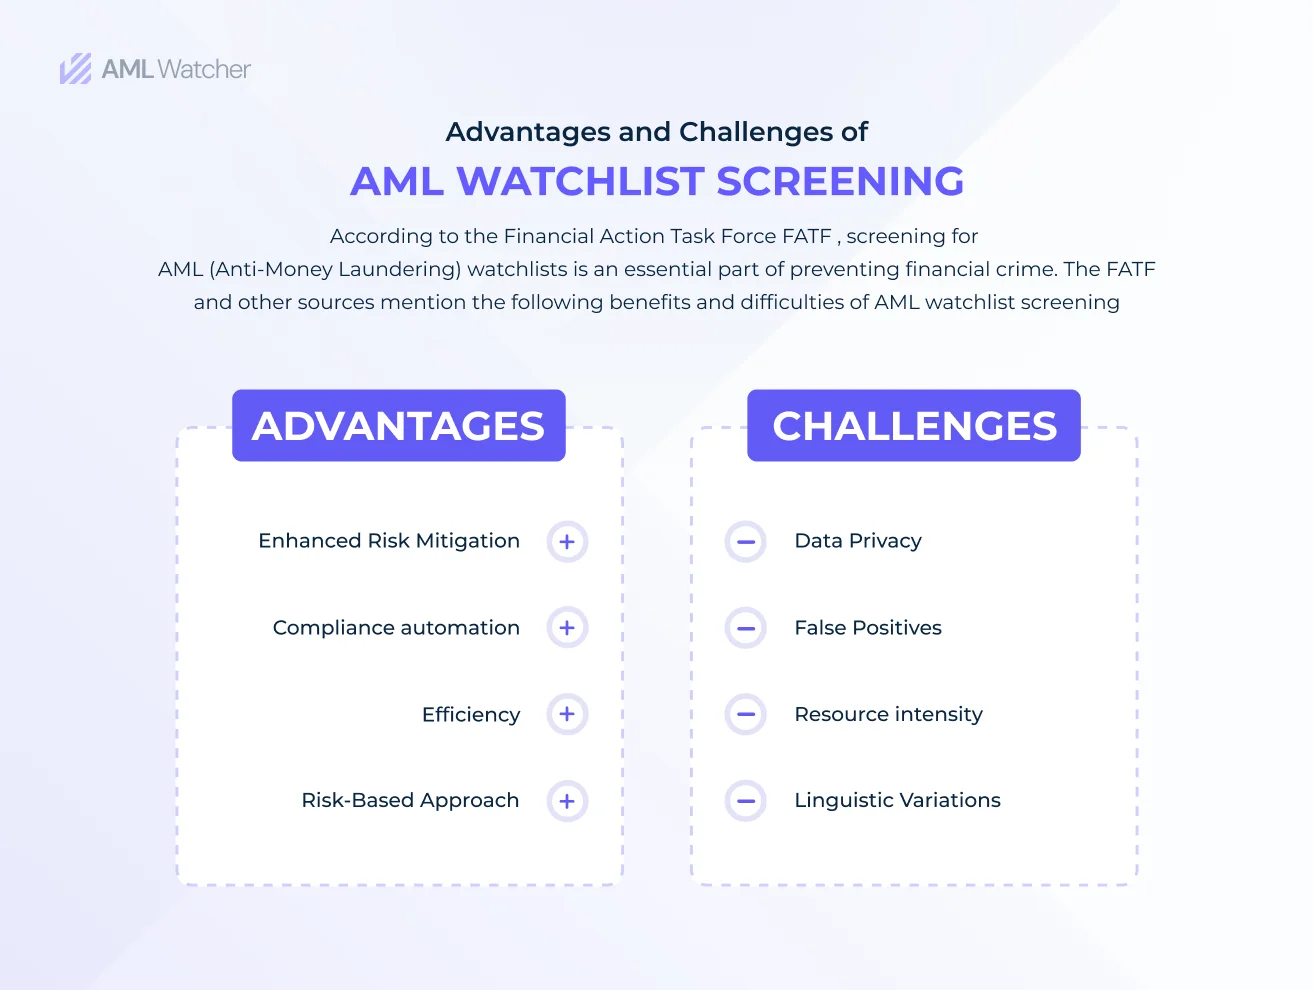 Advantages and Challenges of AML Watchlist Screening